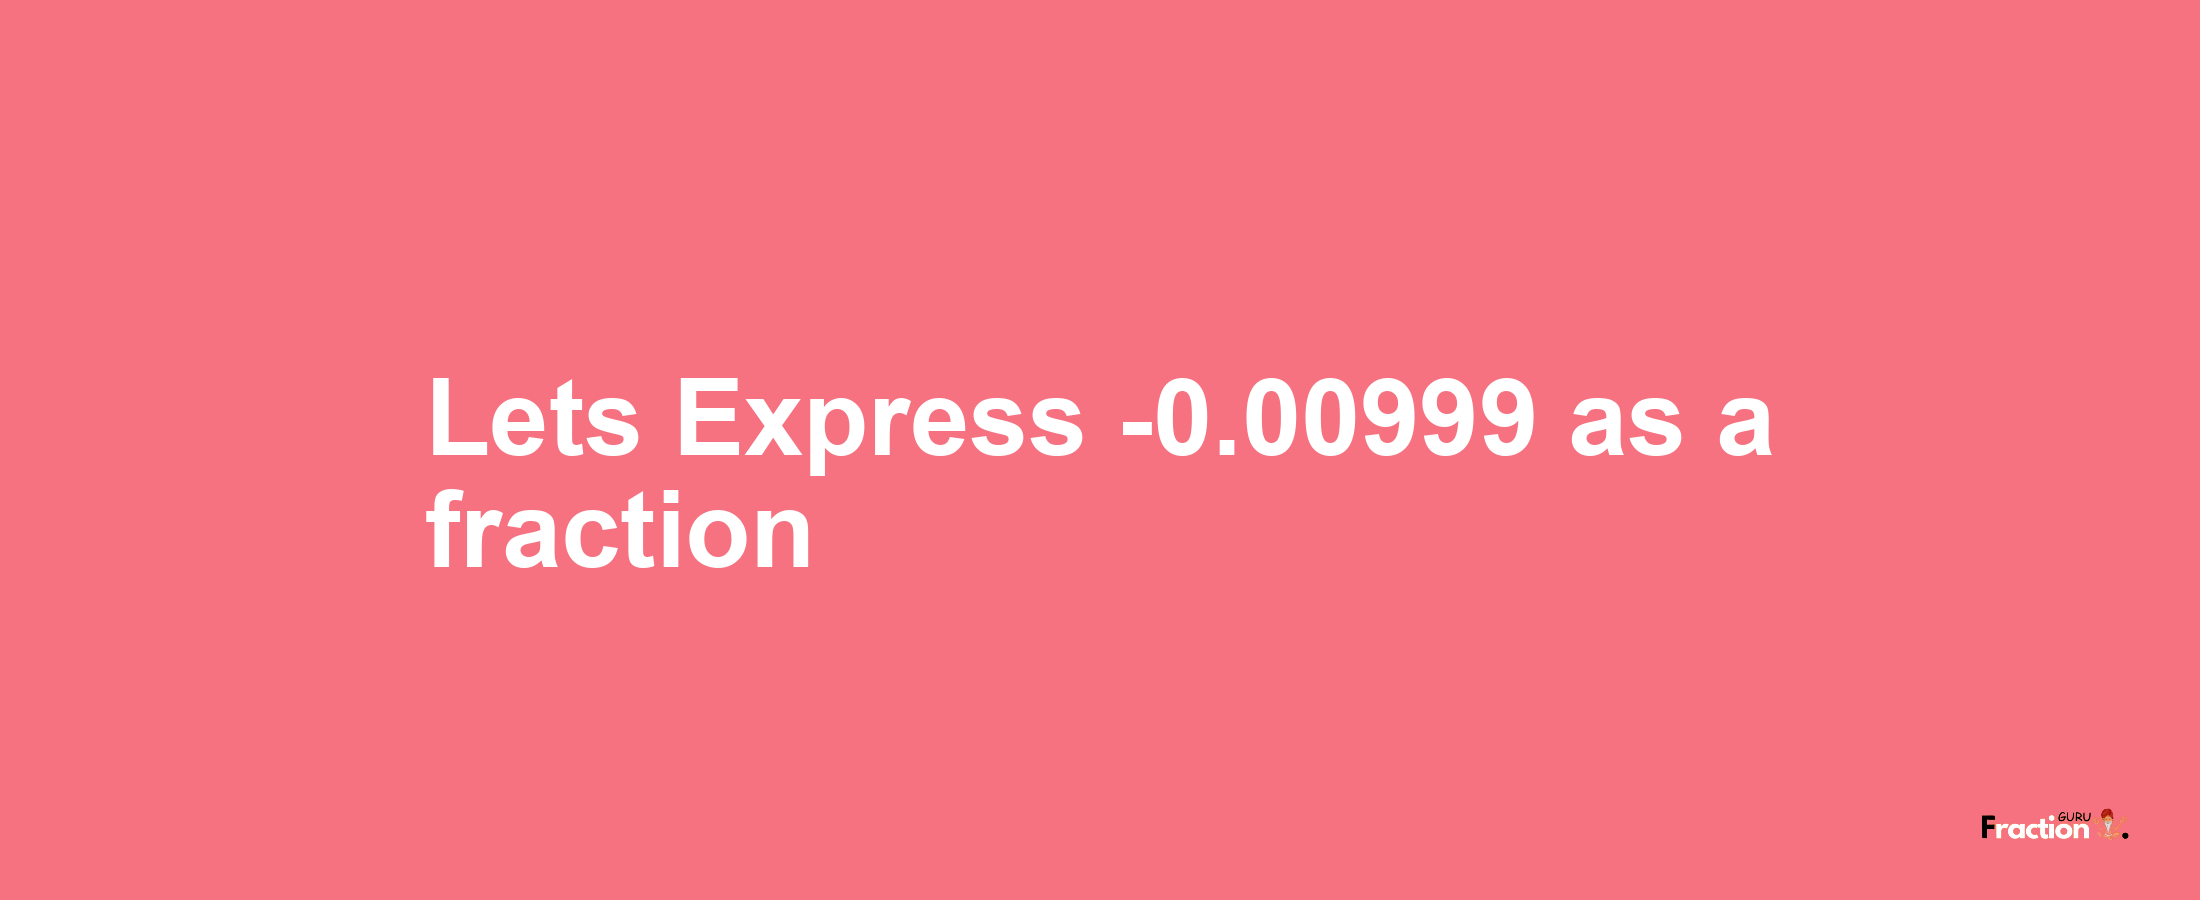 Lets Express -0.00999 as afraction